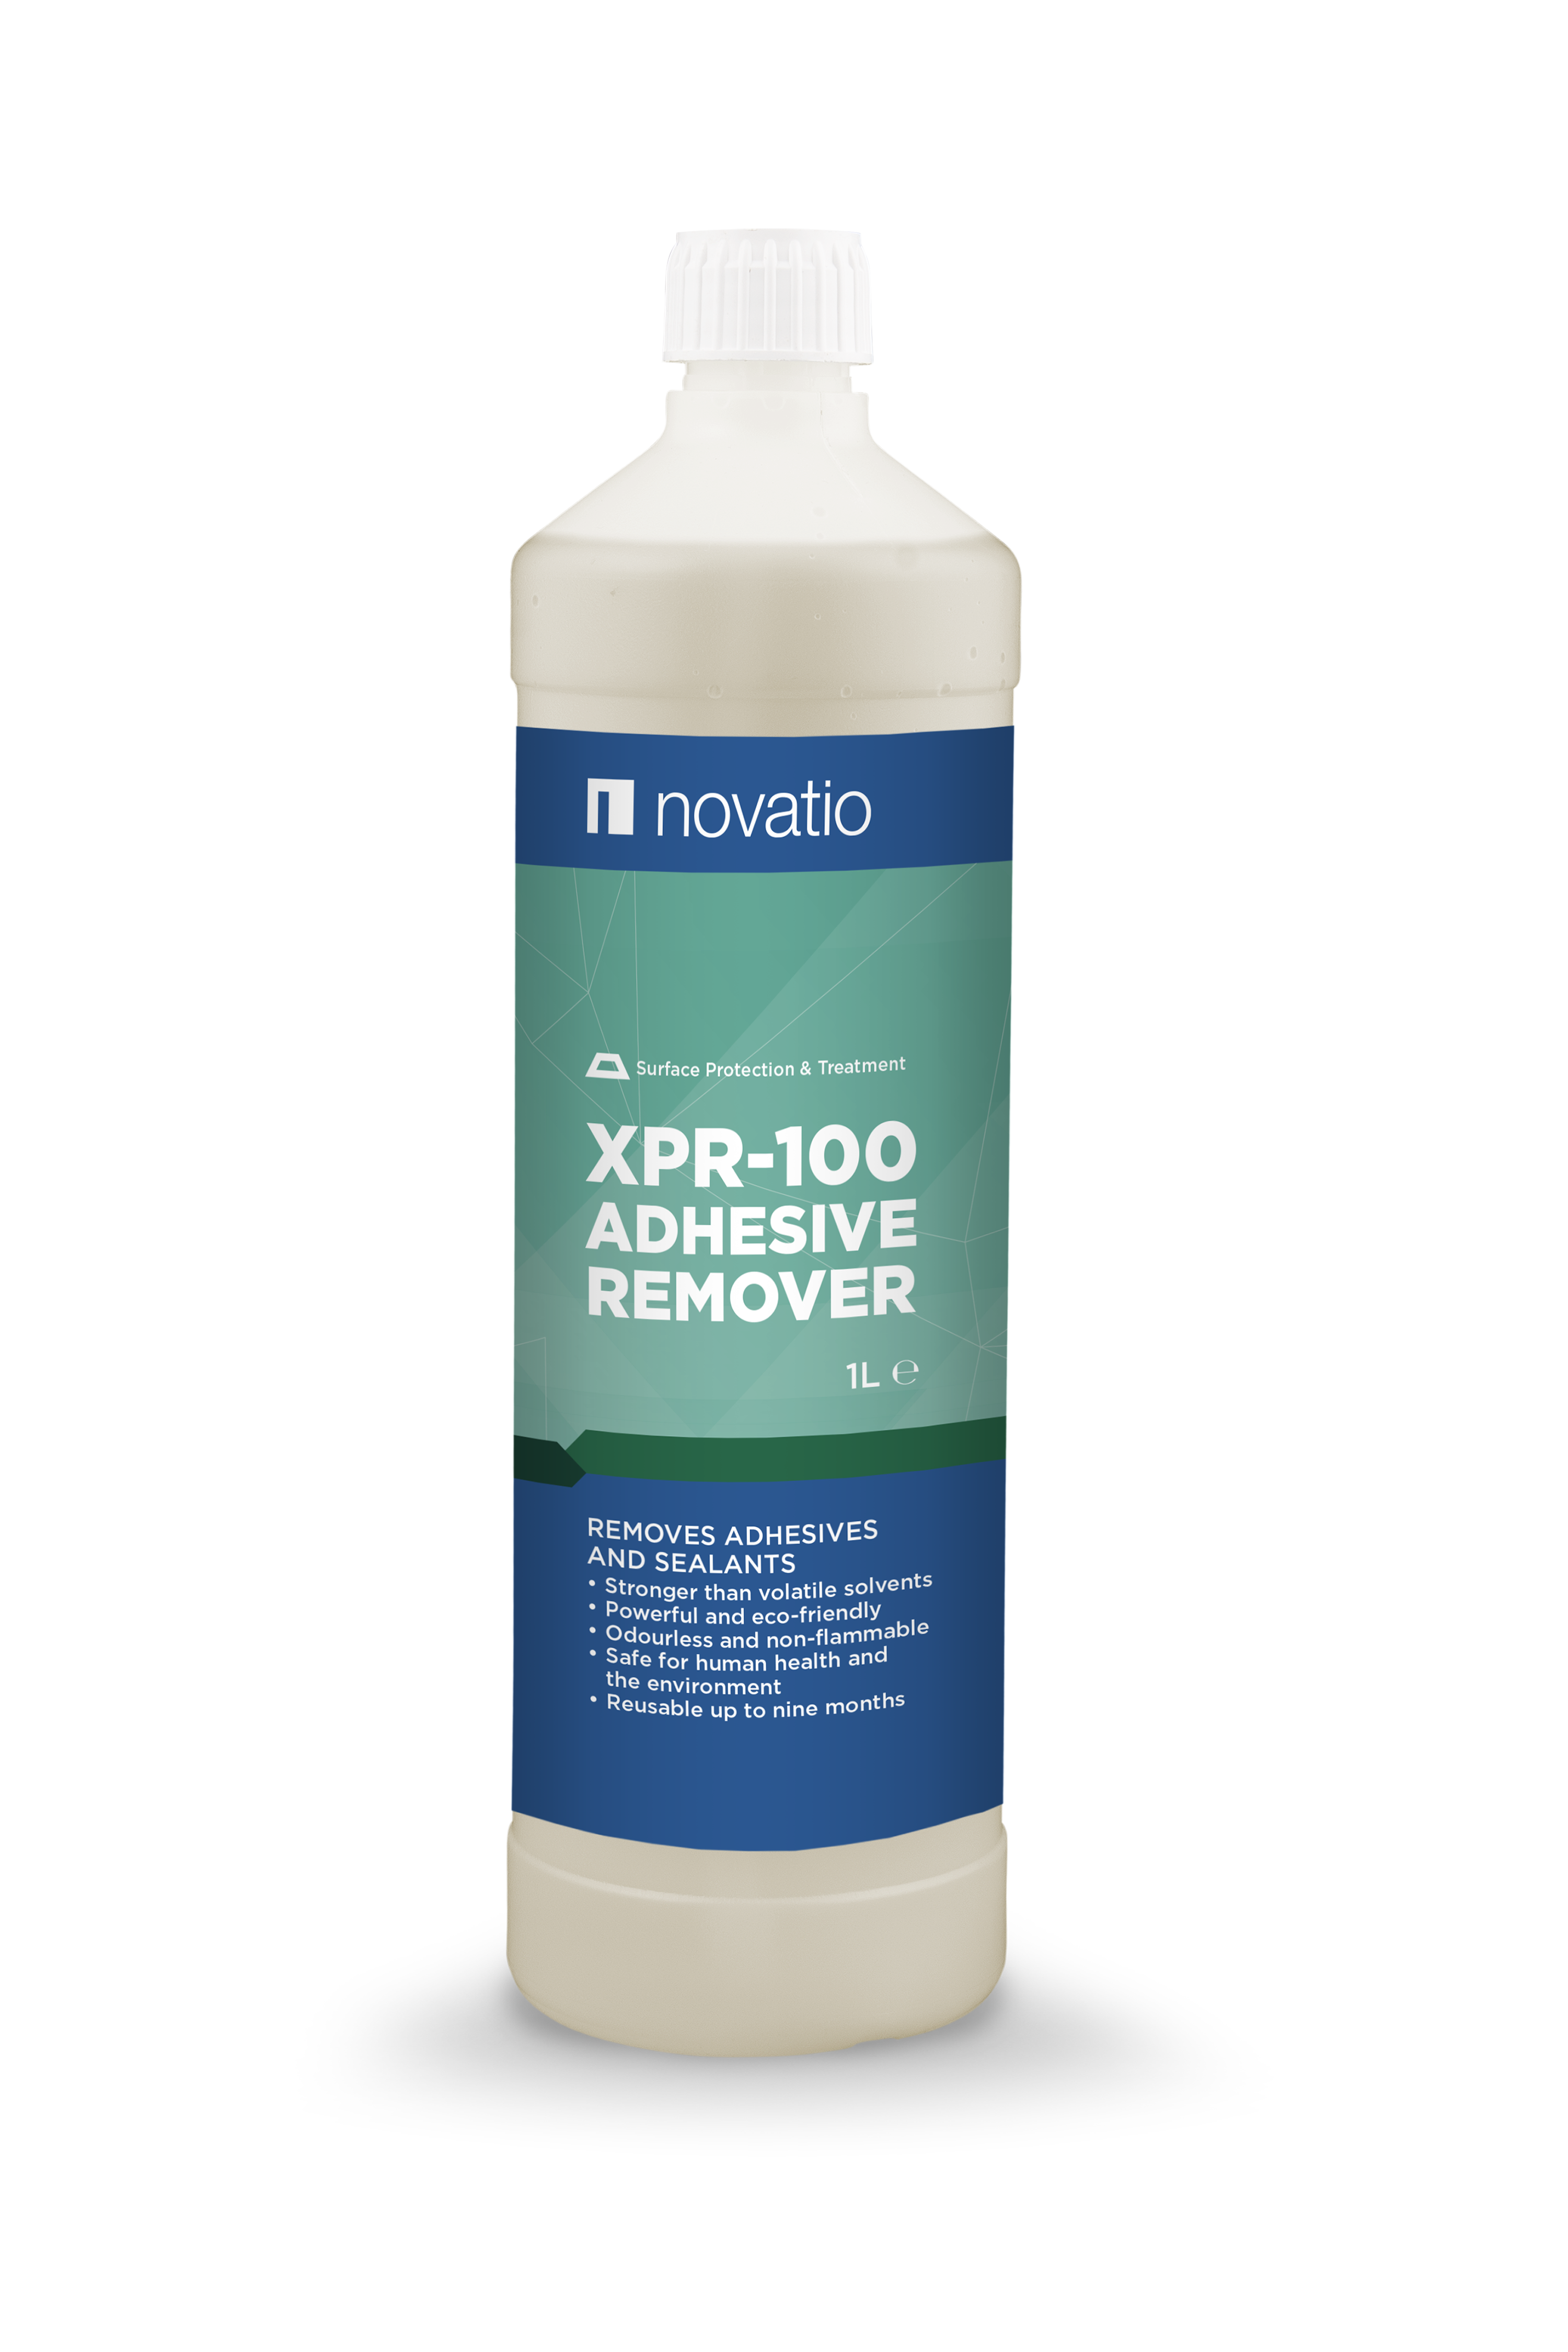 XPR-100 Adhesive Remover